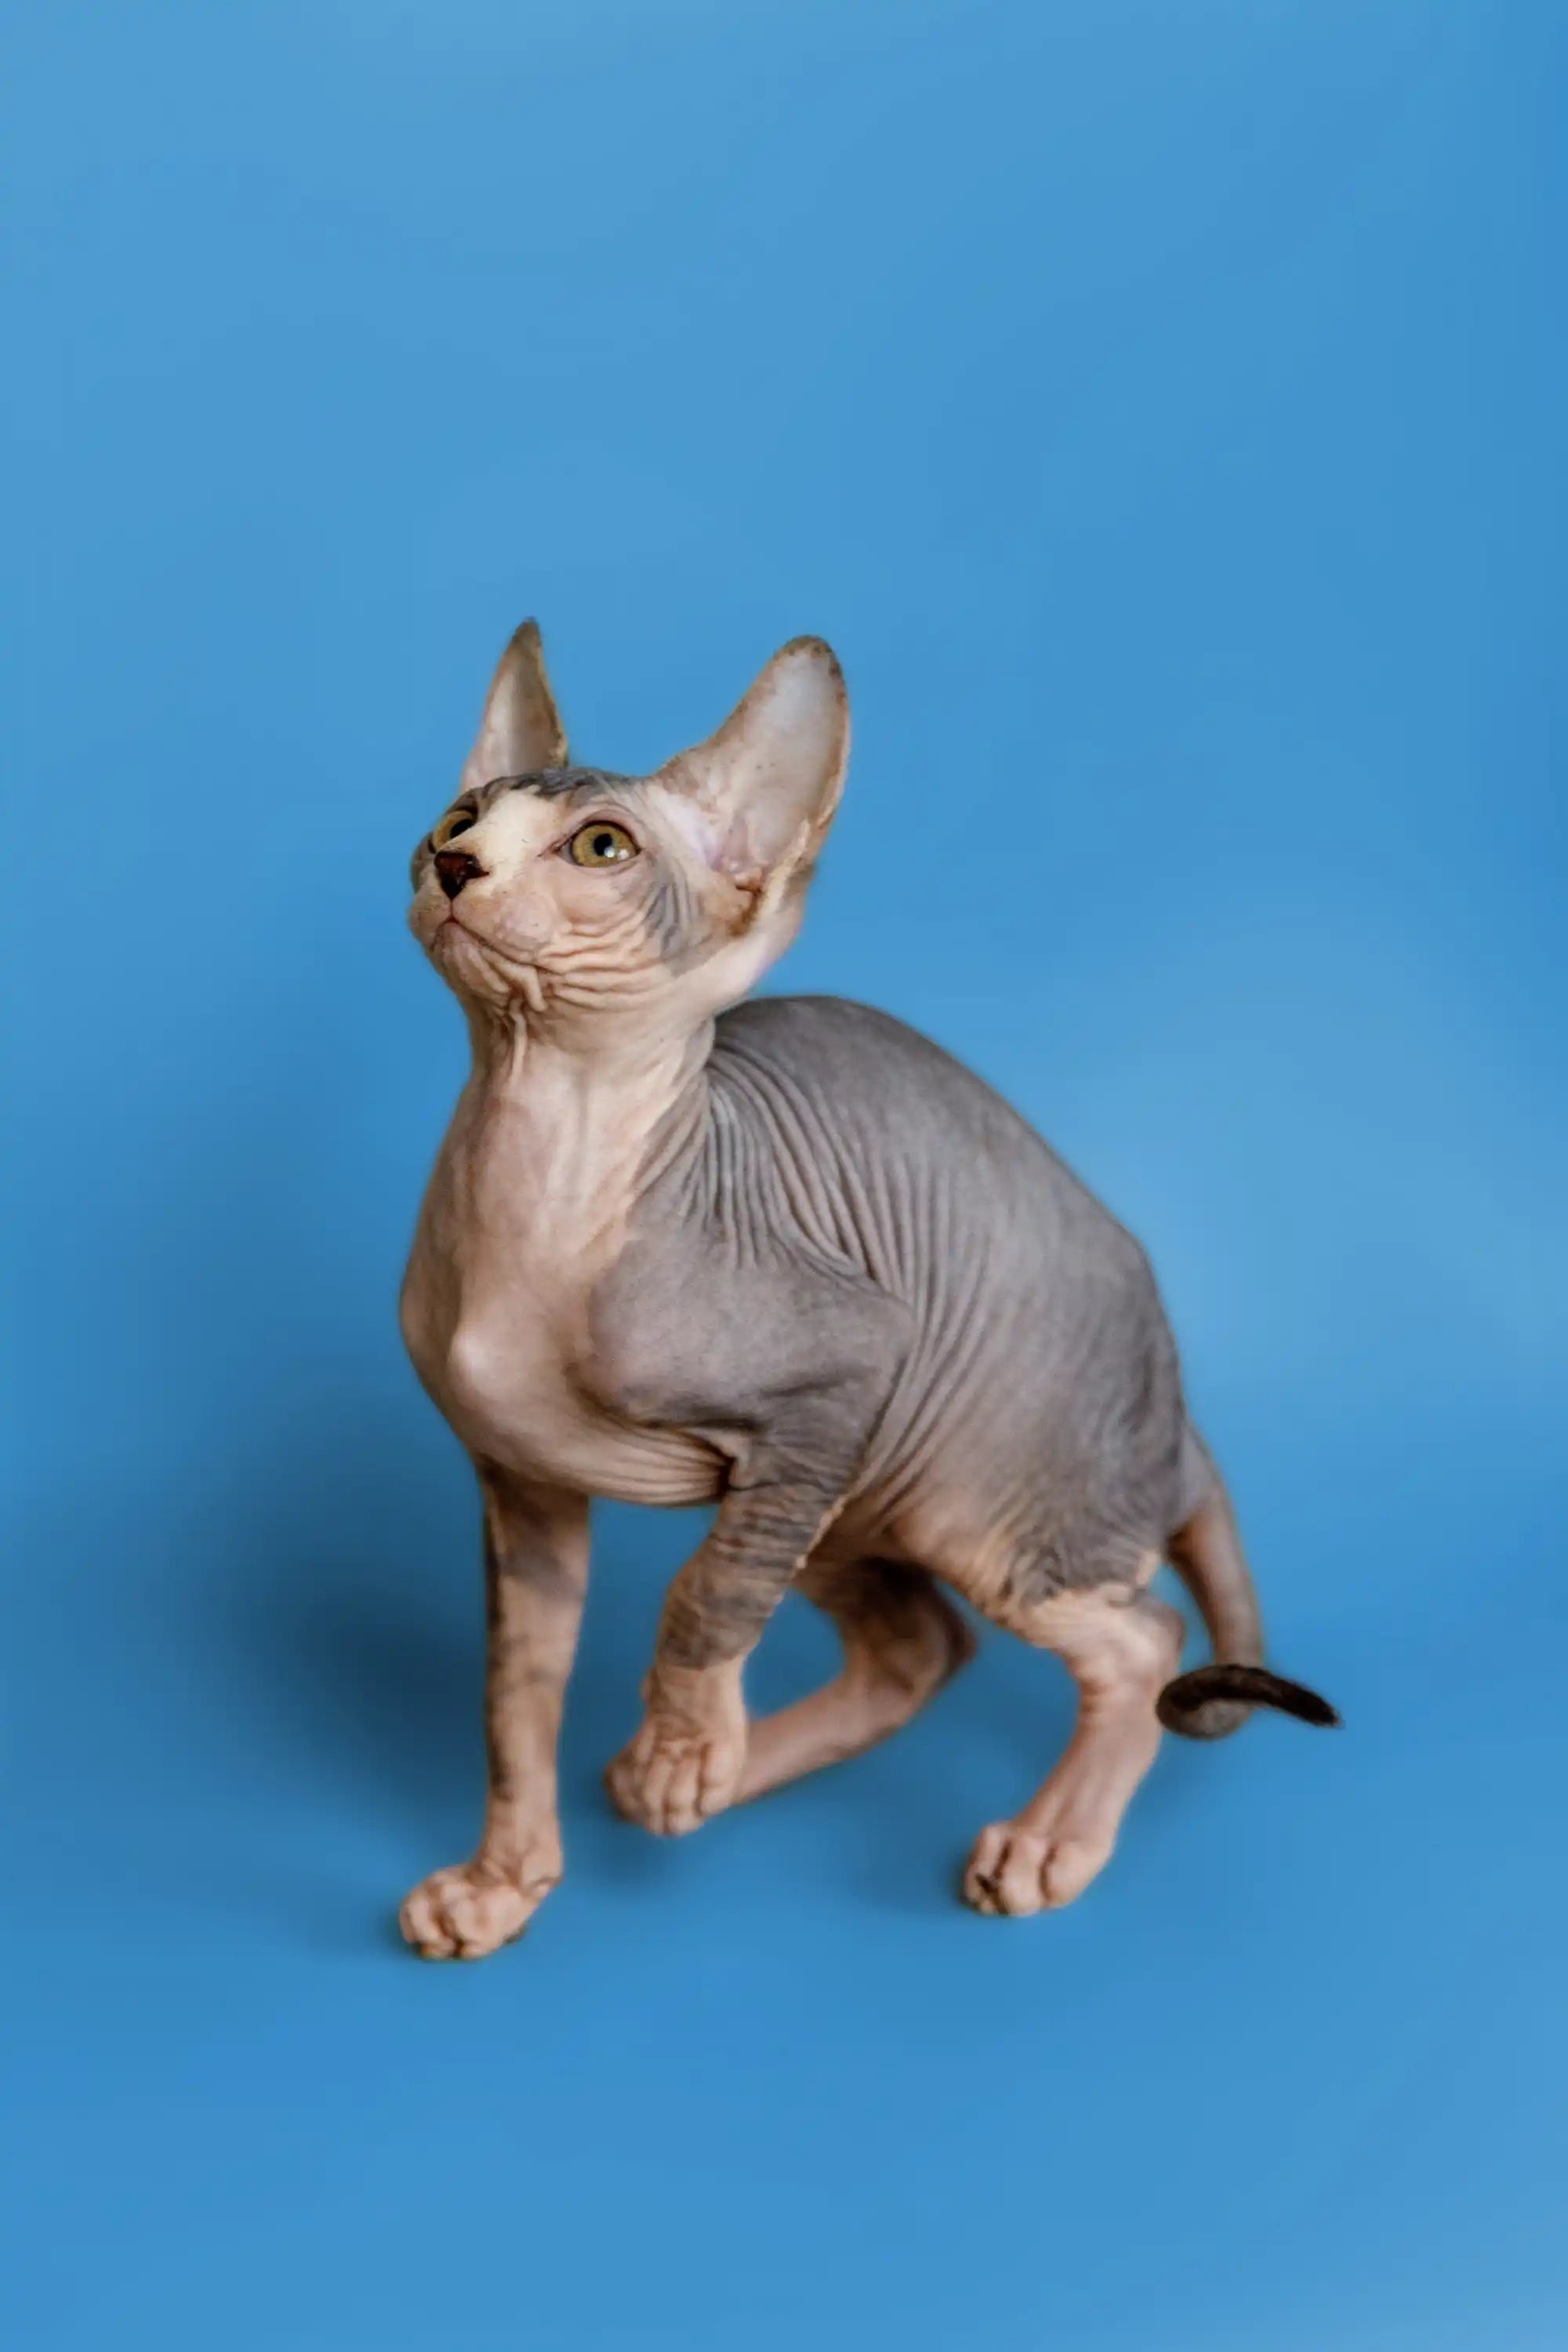 Sphynx Cats and Kittens for Sale Denny | Kitten